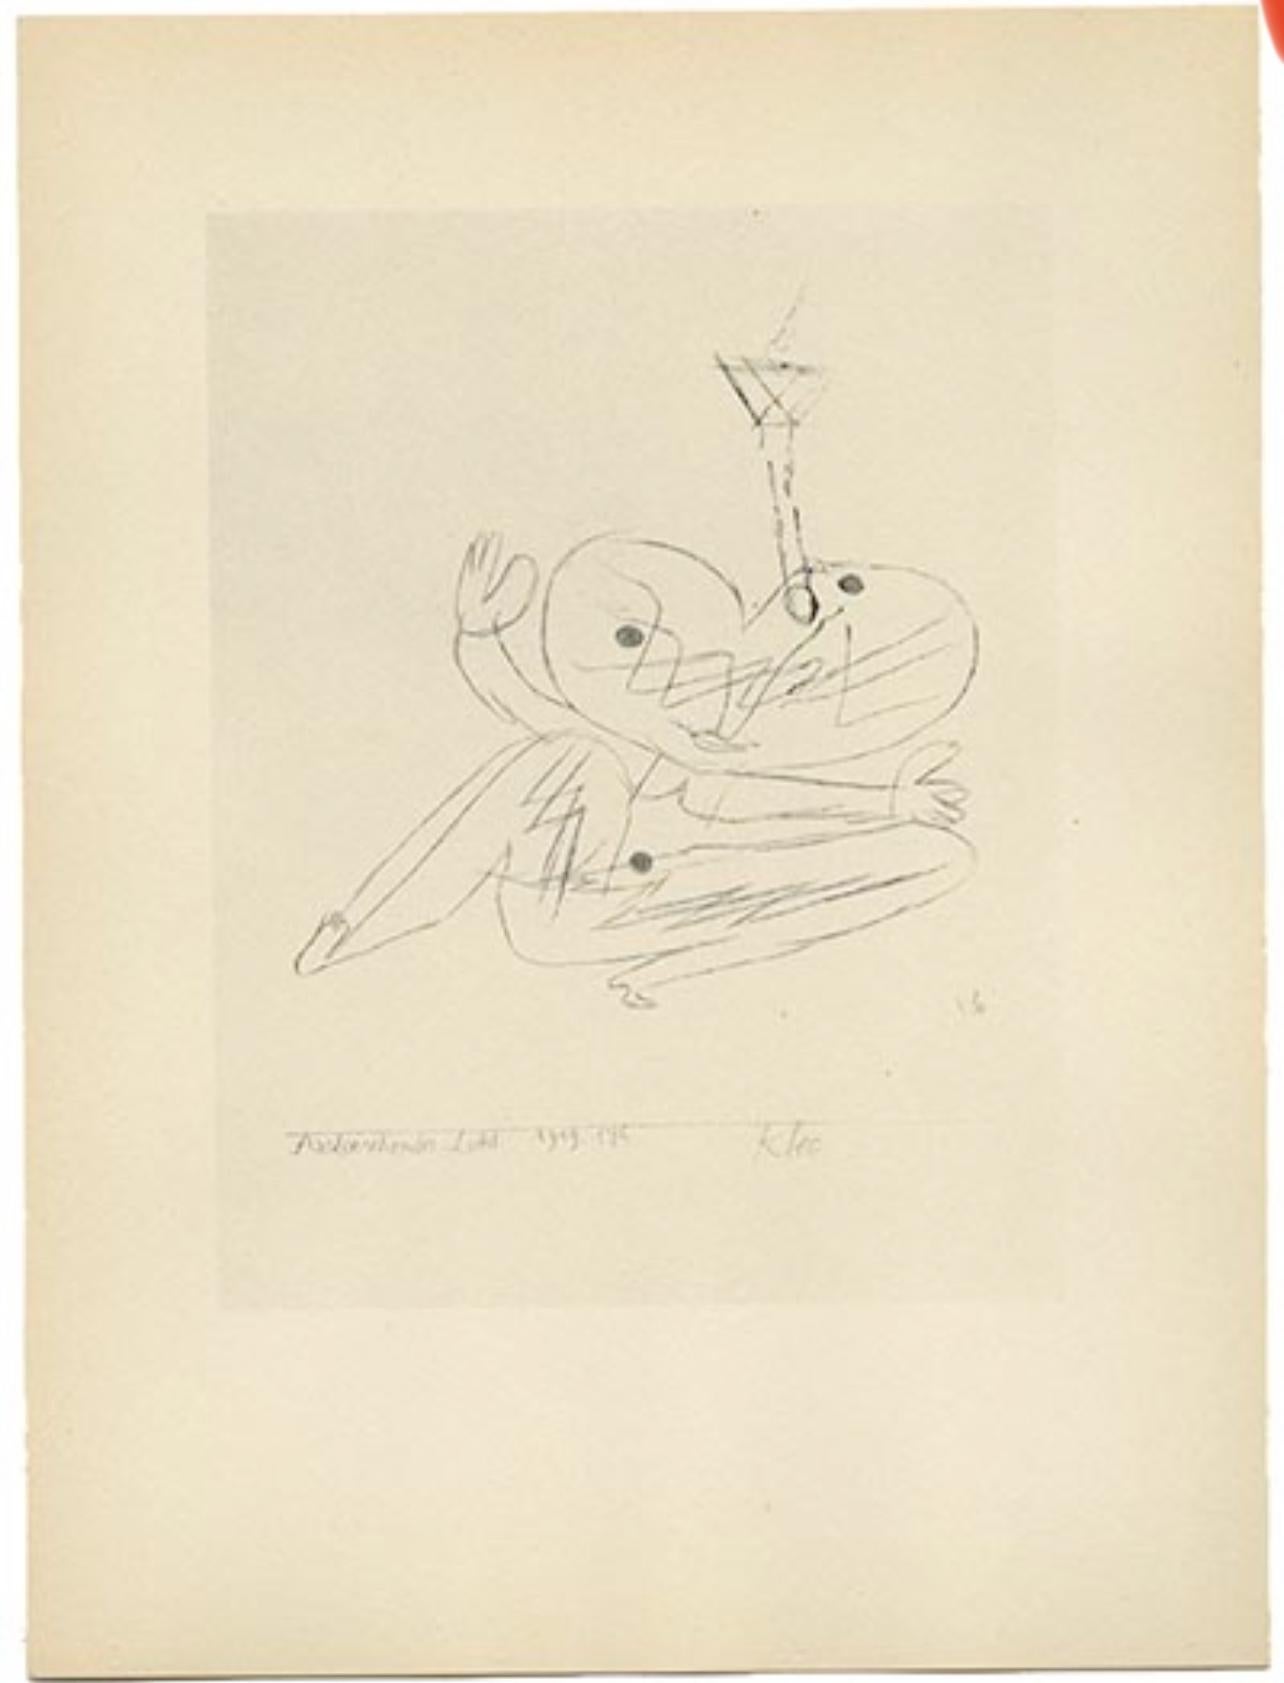 Klee, Dying Light, Prints of Paul Klee (after) For Sale 3